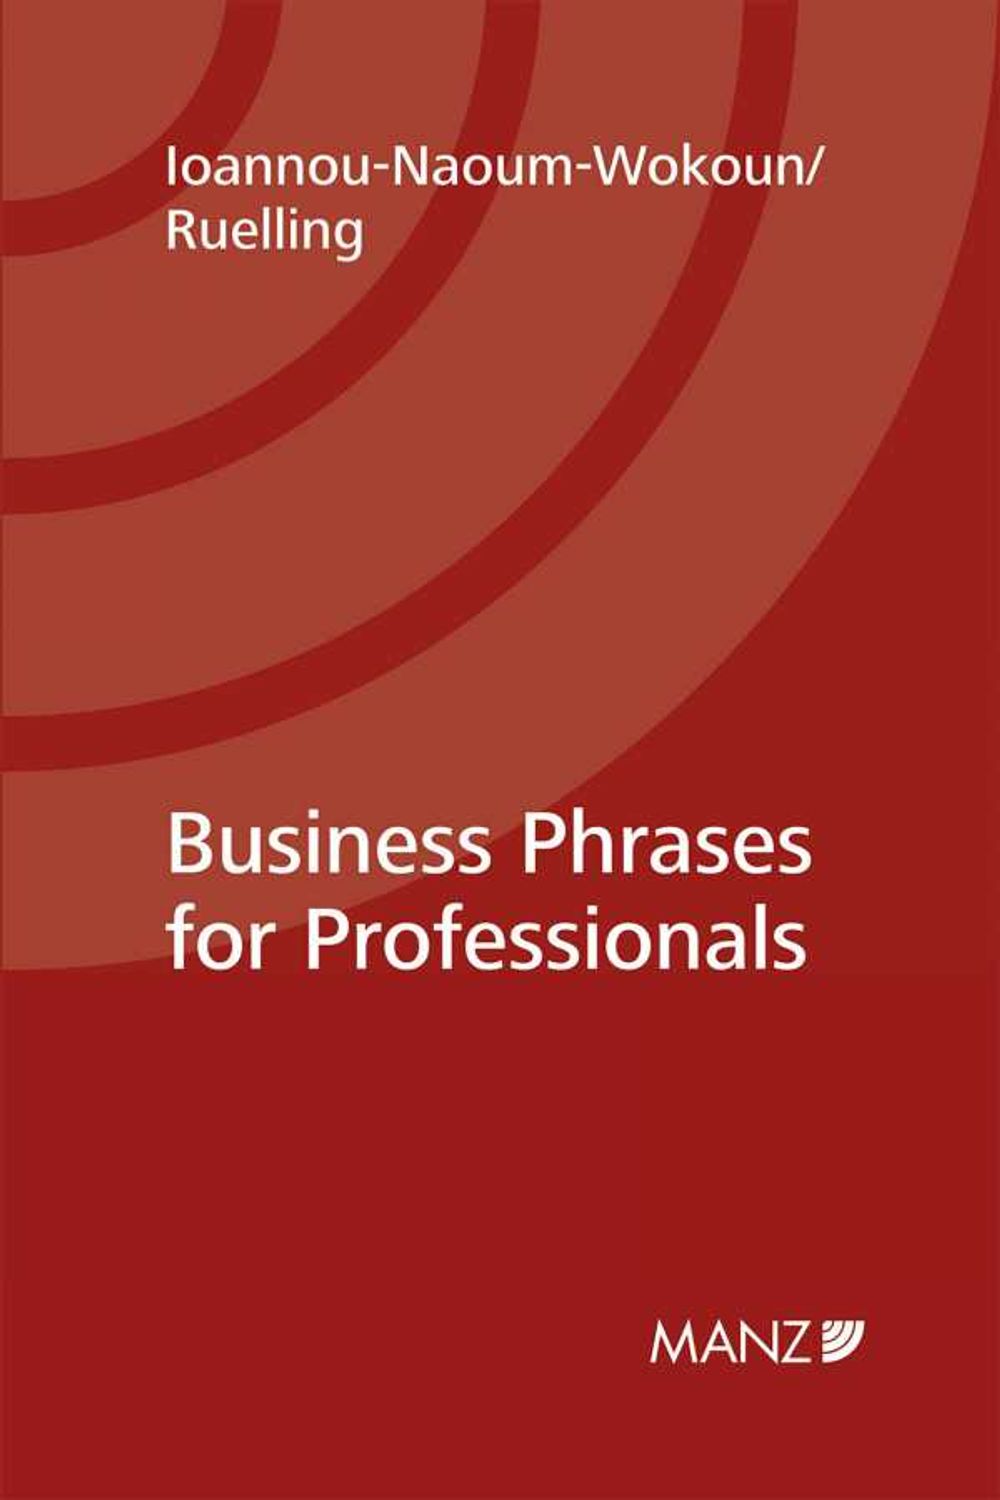 bw-business-phrases-for-professionals-manzsche-wien-9783214019778